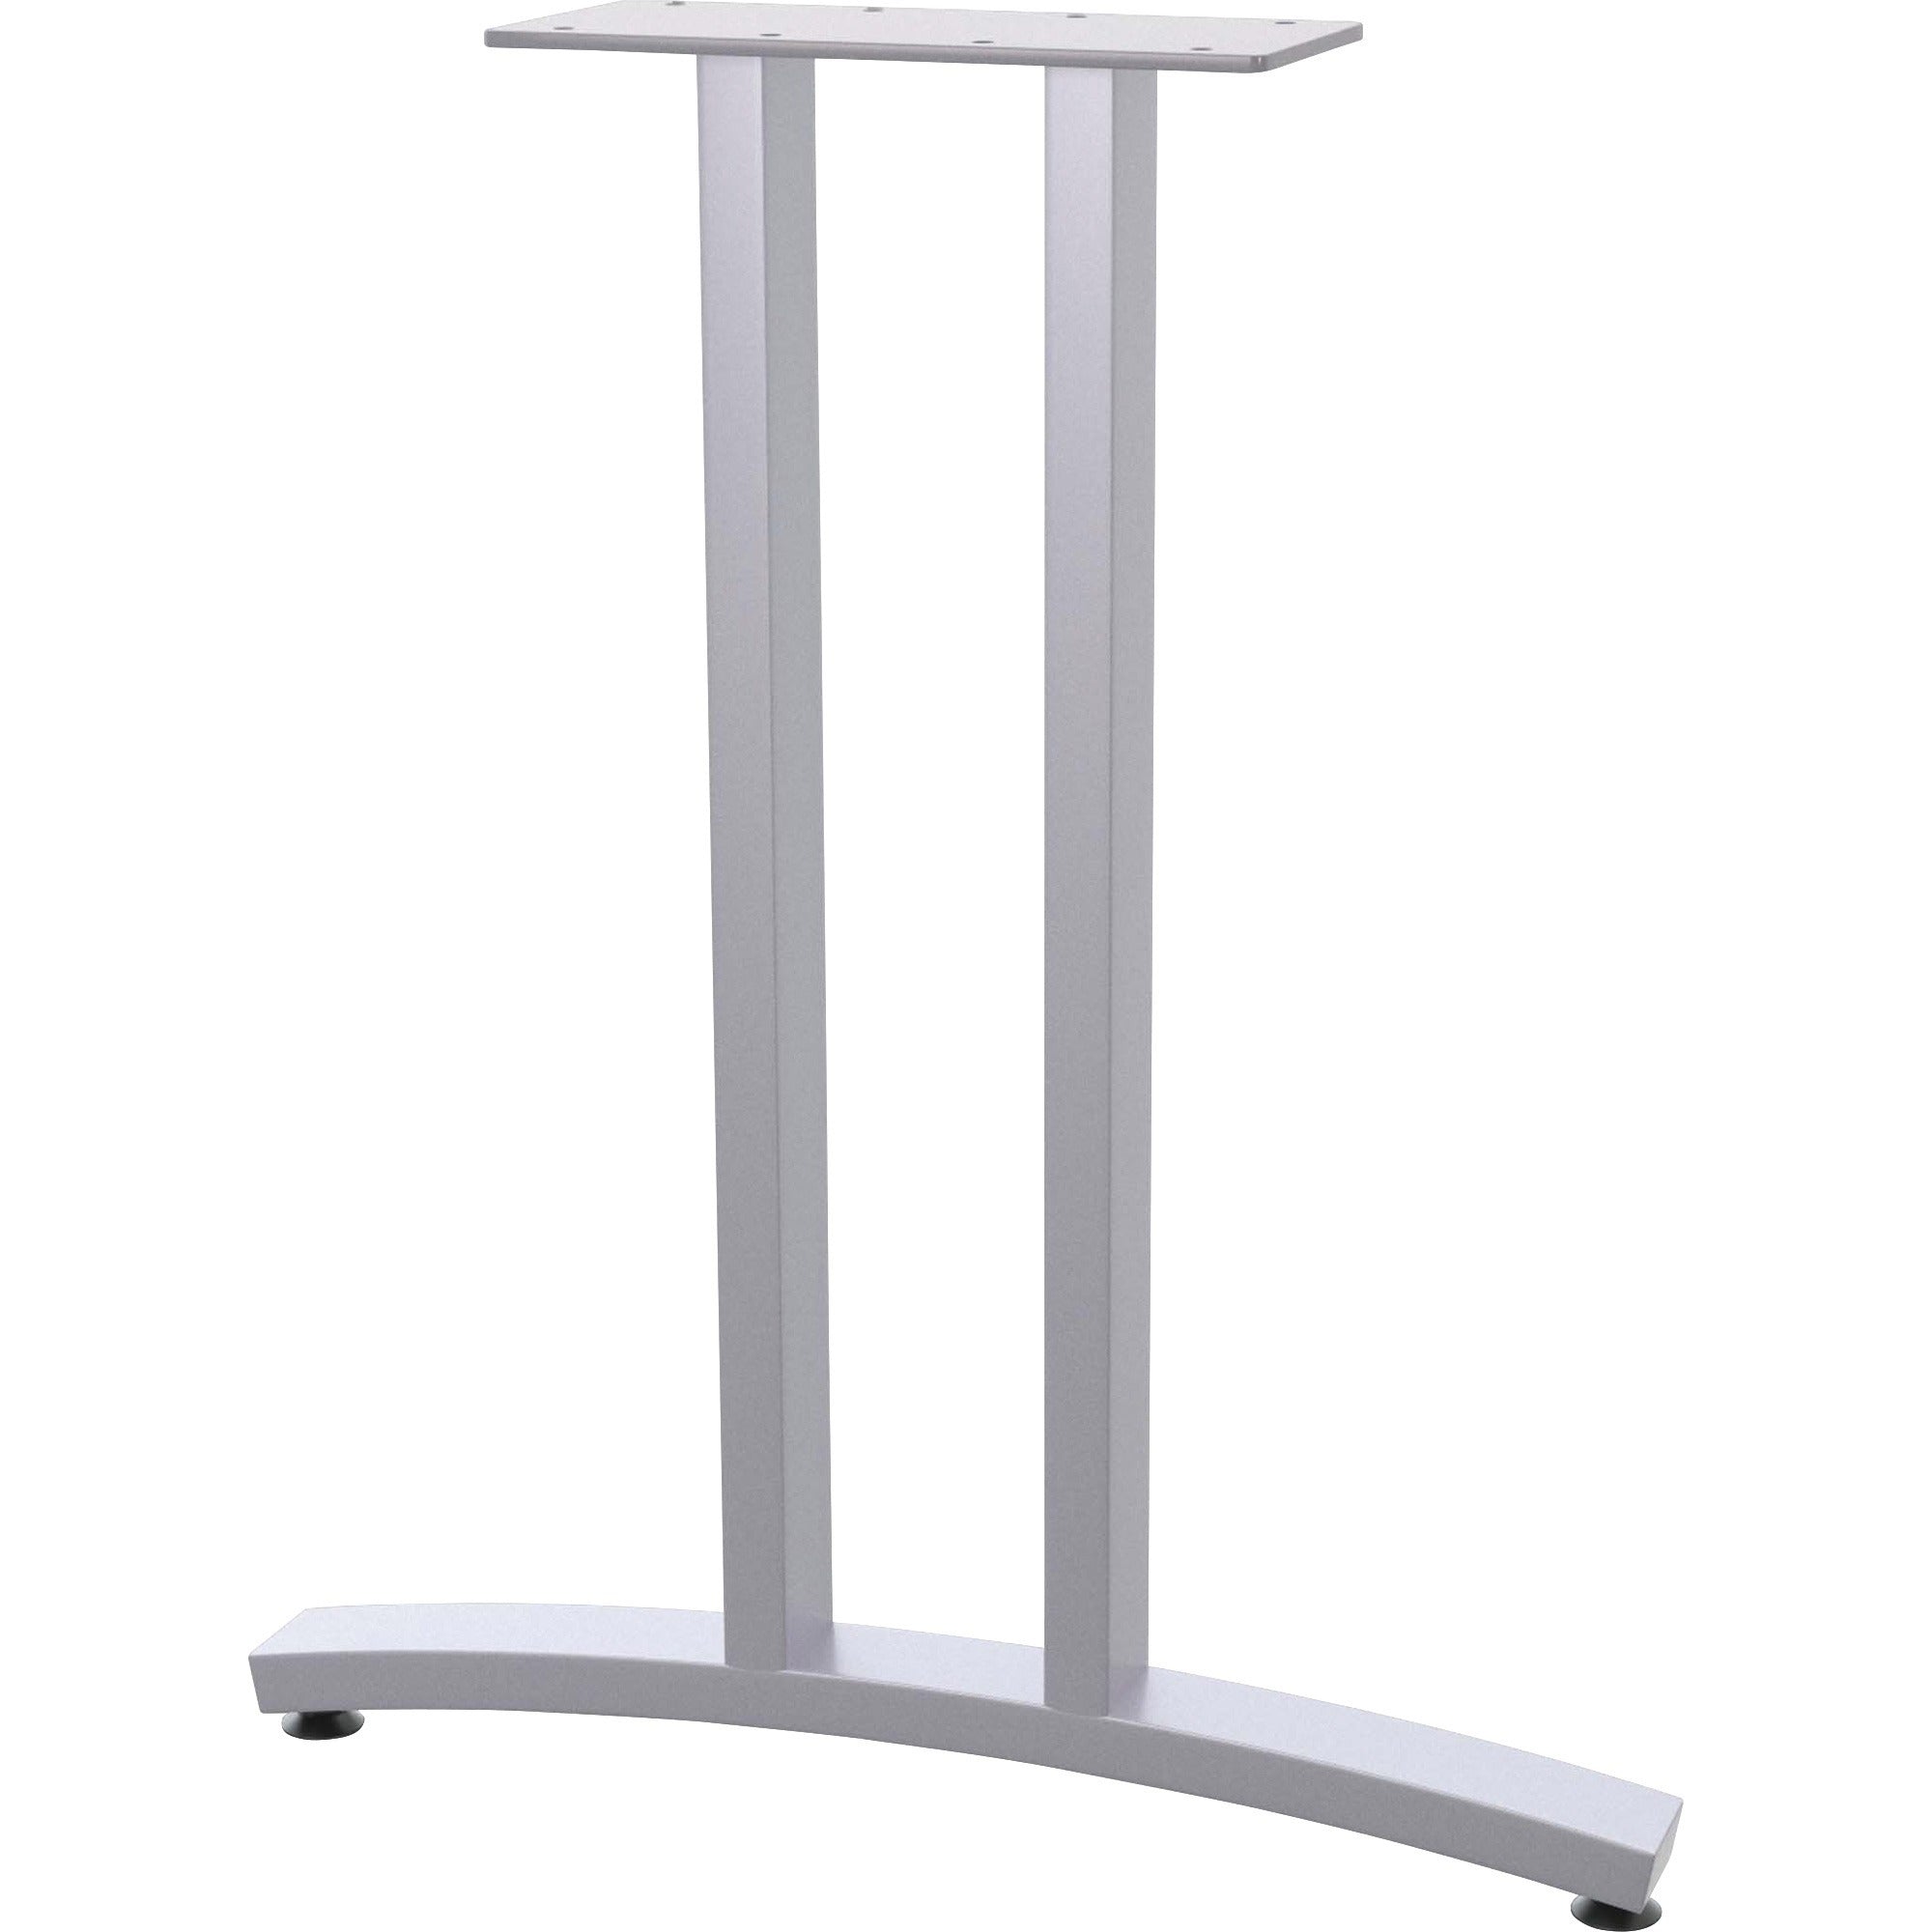 special-t-structure-series-t-leg-table-base-powder-coated-t-shaped-metallic-silver-base-2-legs-150-lb-capacity-assembly-required-1-set_sctrs2t24 - 1